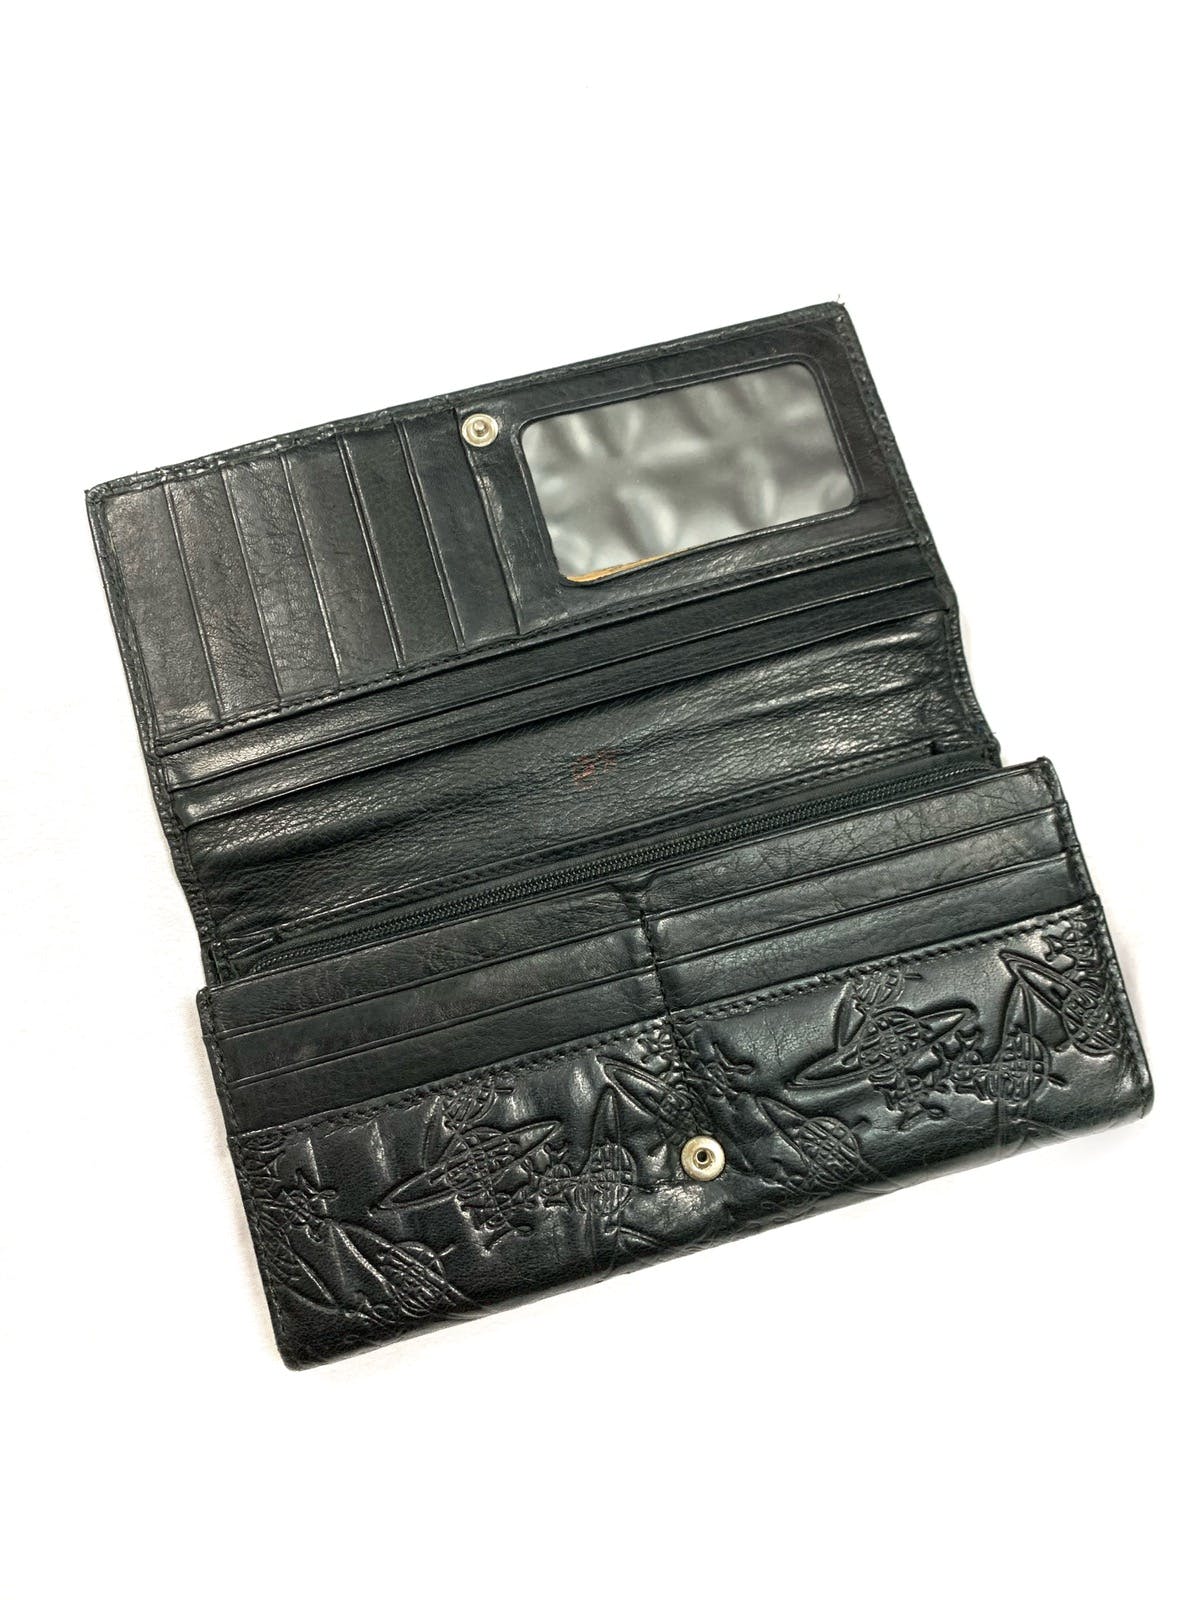 Vivienne Weswood long leather wallet made in italy - 2